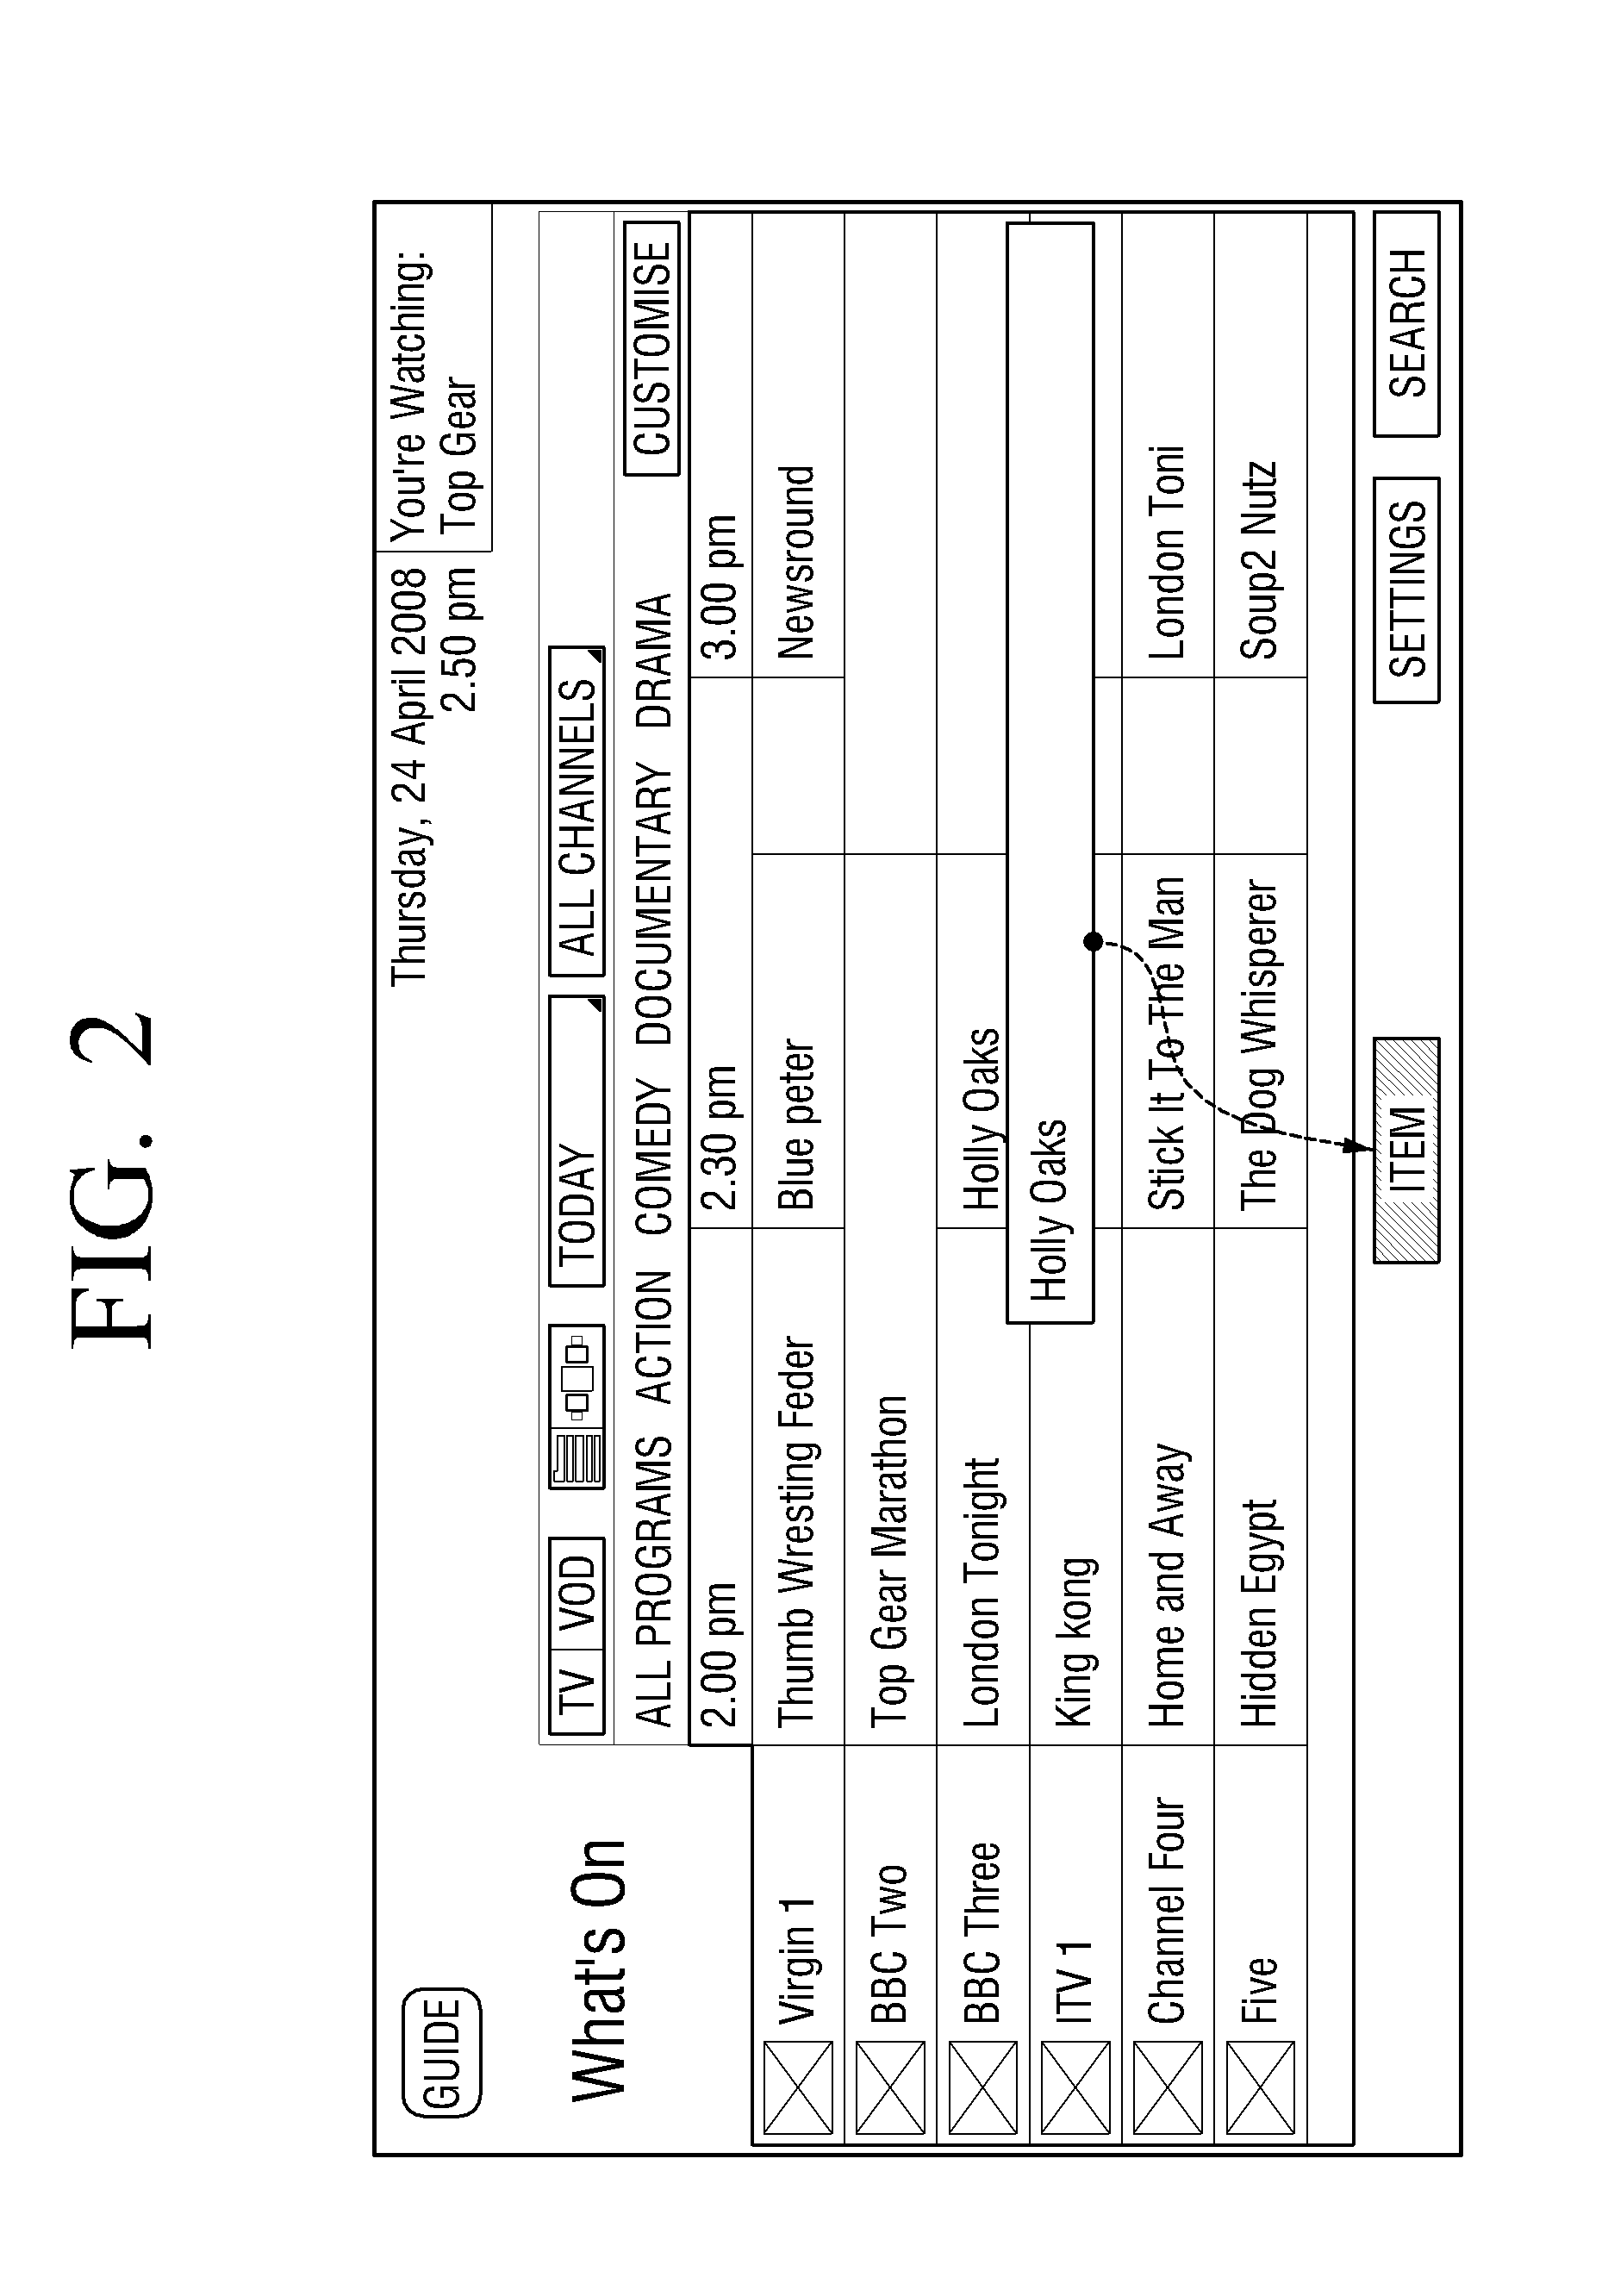 Display apparatus and method for scheduling broadcast using the same